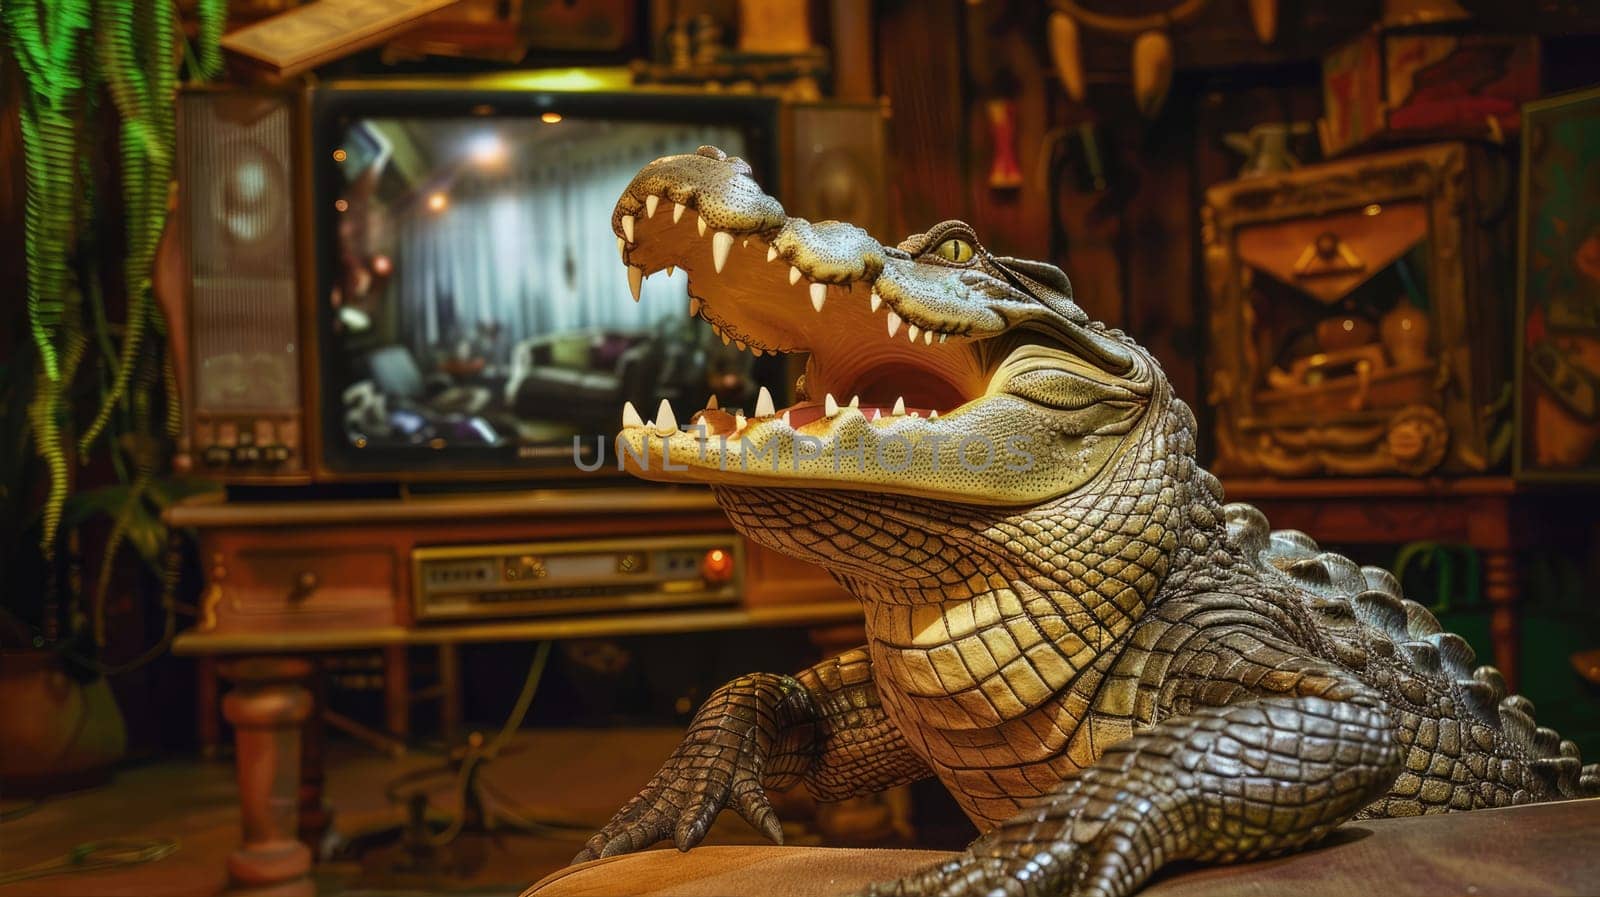 A Crocodile is wearing a suit and tie while sitting in front of a television. Its jaw, fangs, snout, and scaled reptile features are visible AI